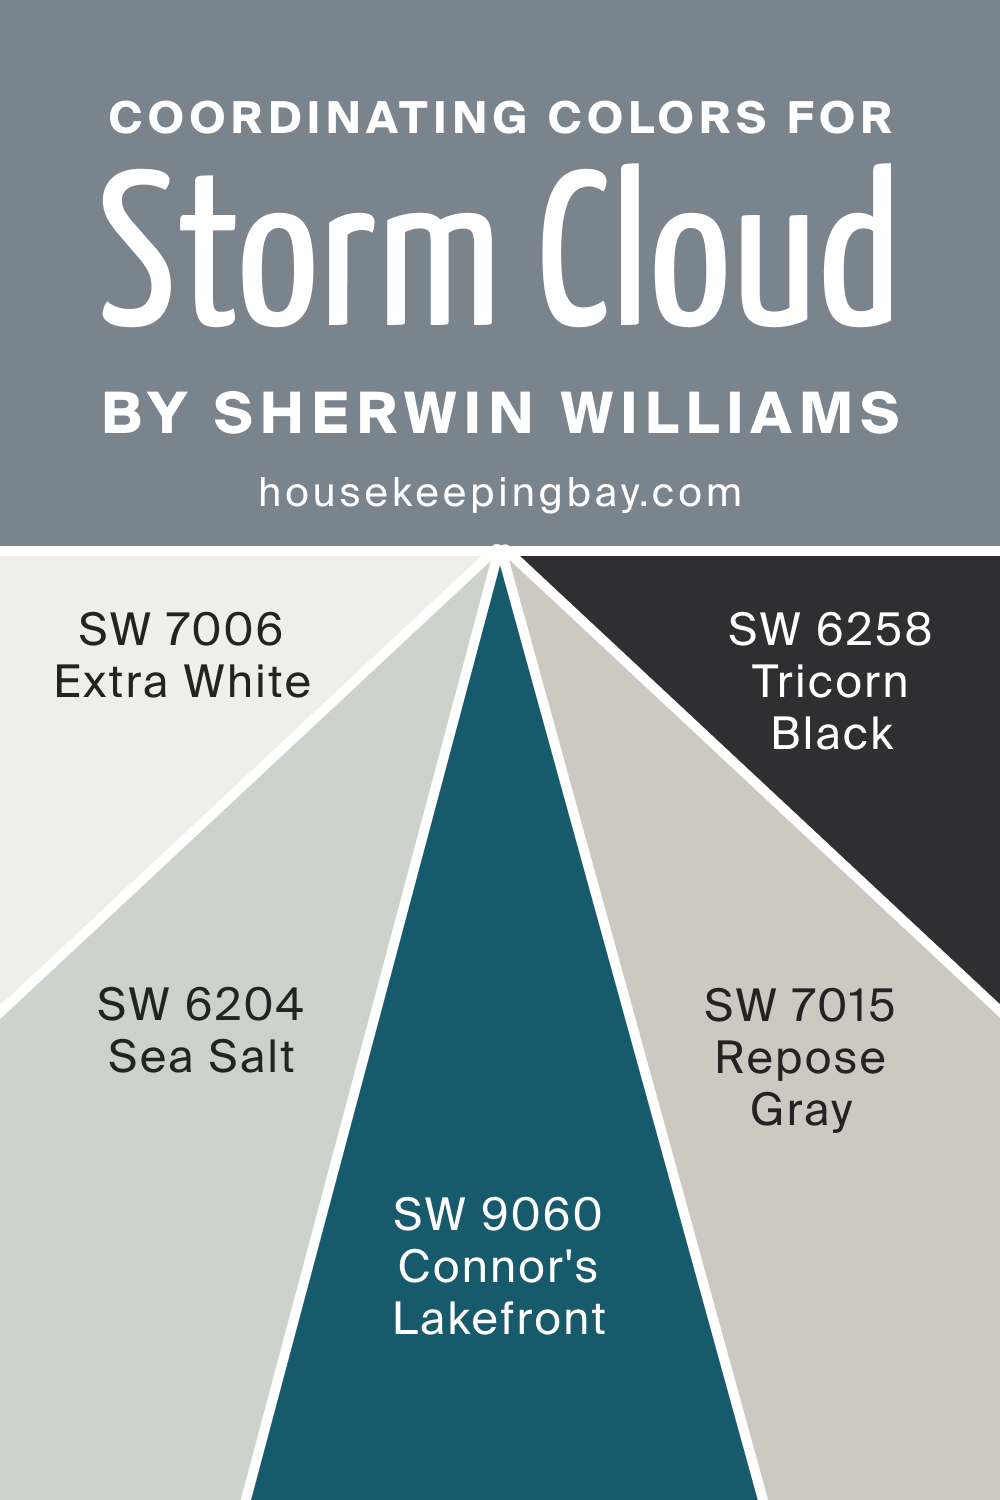 Coordinating Colors for SW 6249 Storm Cloud by Sherwin Williams